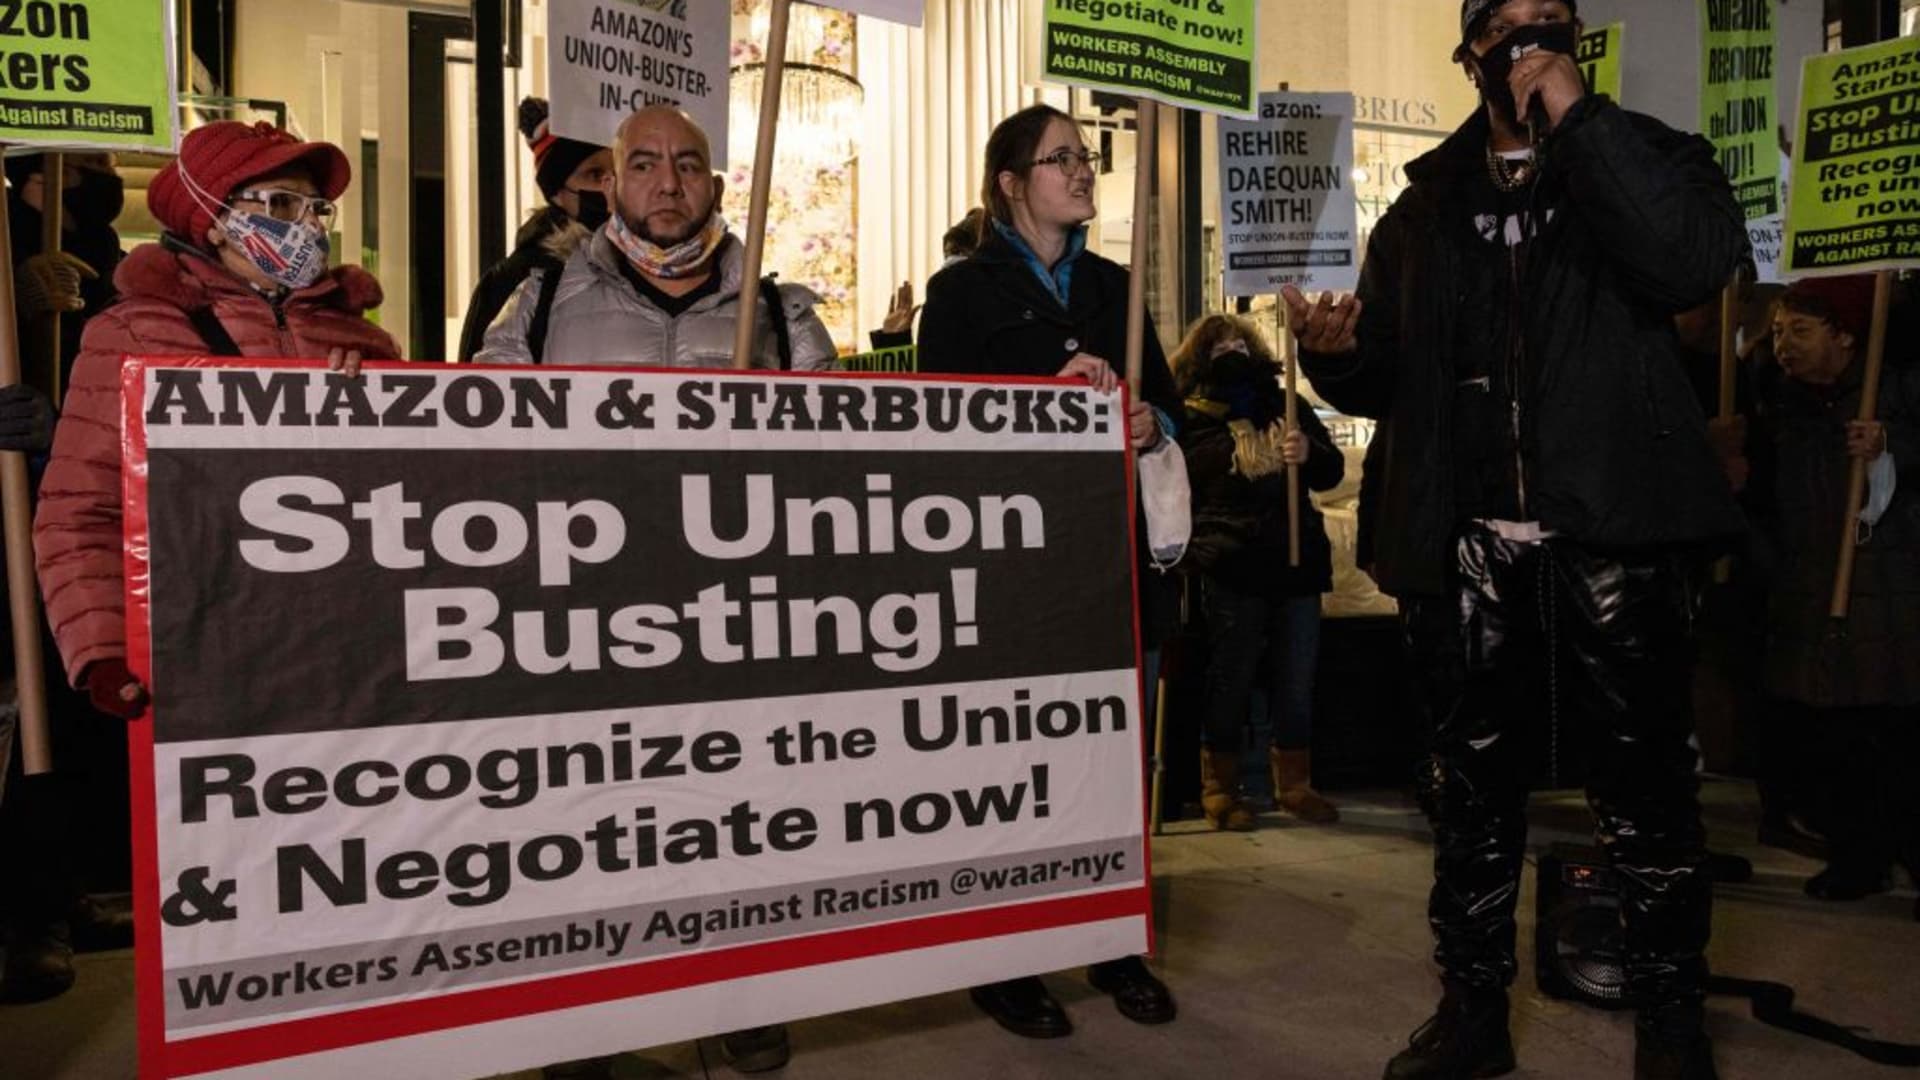 People hold placards during a protest in support of Amazon and Starbucks workers in New York City on November 26, 2021.